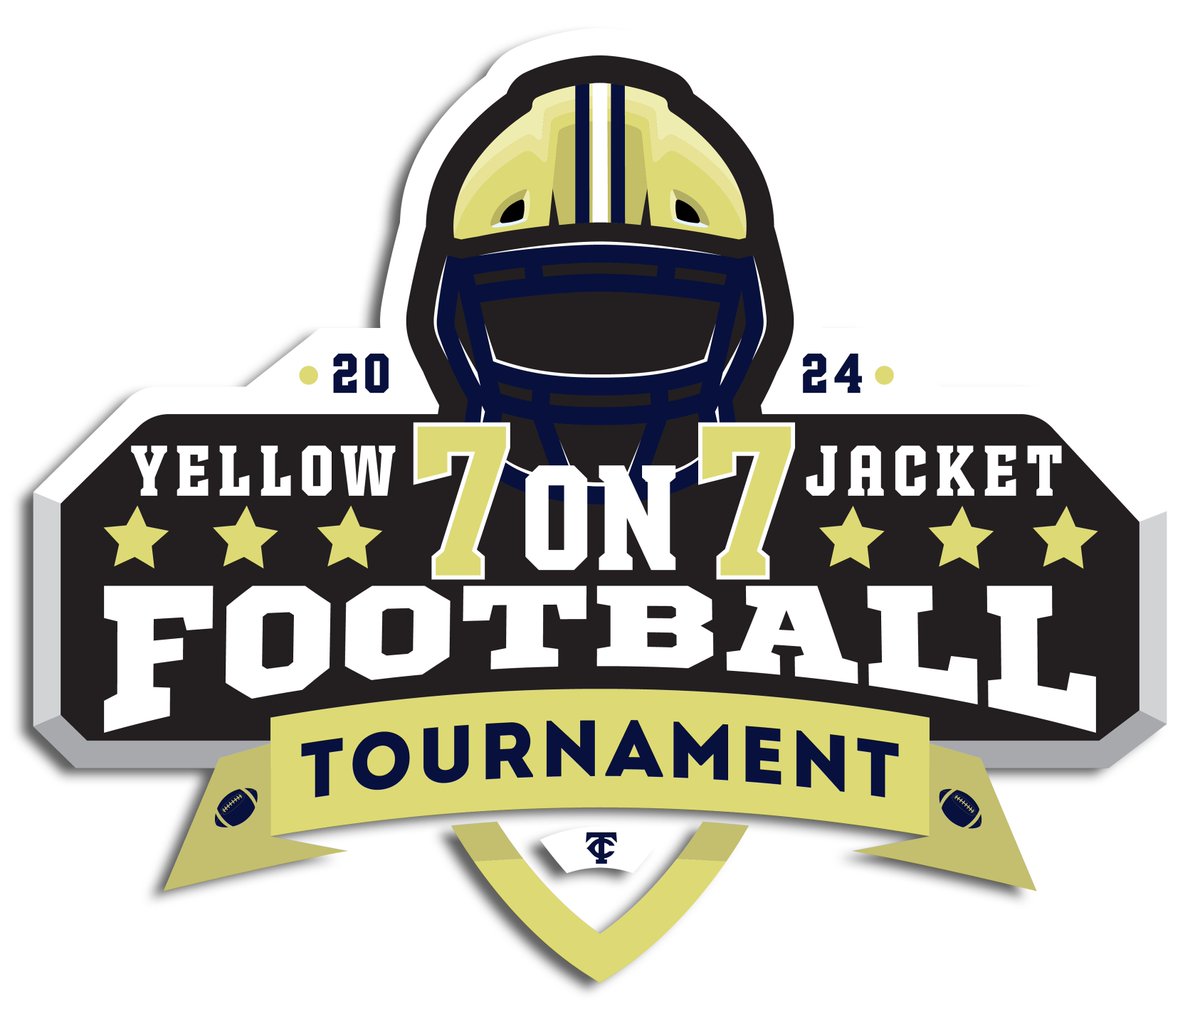 TCC will be hosting FREE 7on7's in June HELMETS ARE REQUIRED Dates: JUNE 4th/11th/18th Start:5:00PM. Games: (4) 20 min EACH Registration Form:docs.google.com/forms/d/e/1FAI… For info contact Dave Windon - 706-587-8750 or email Dwindon@tcjackets.net